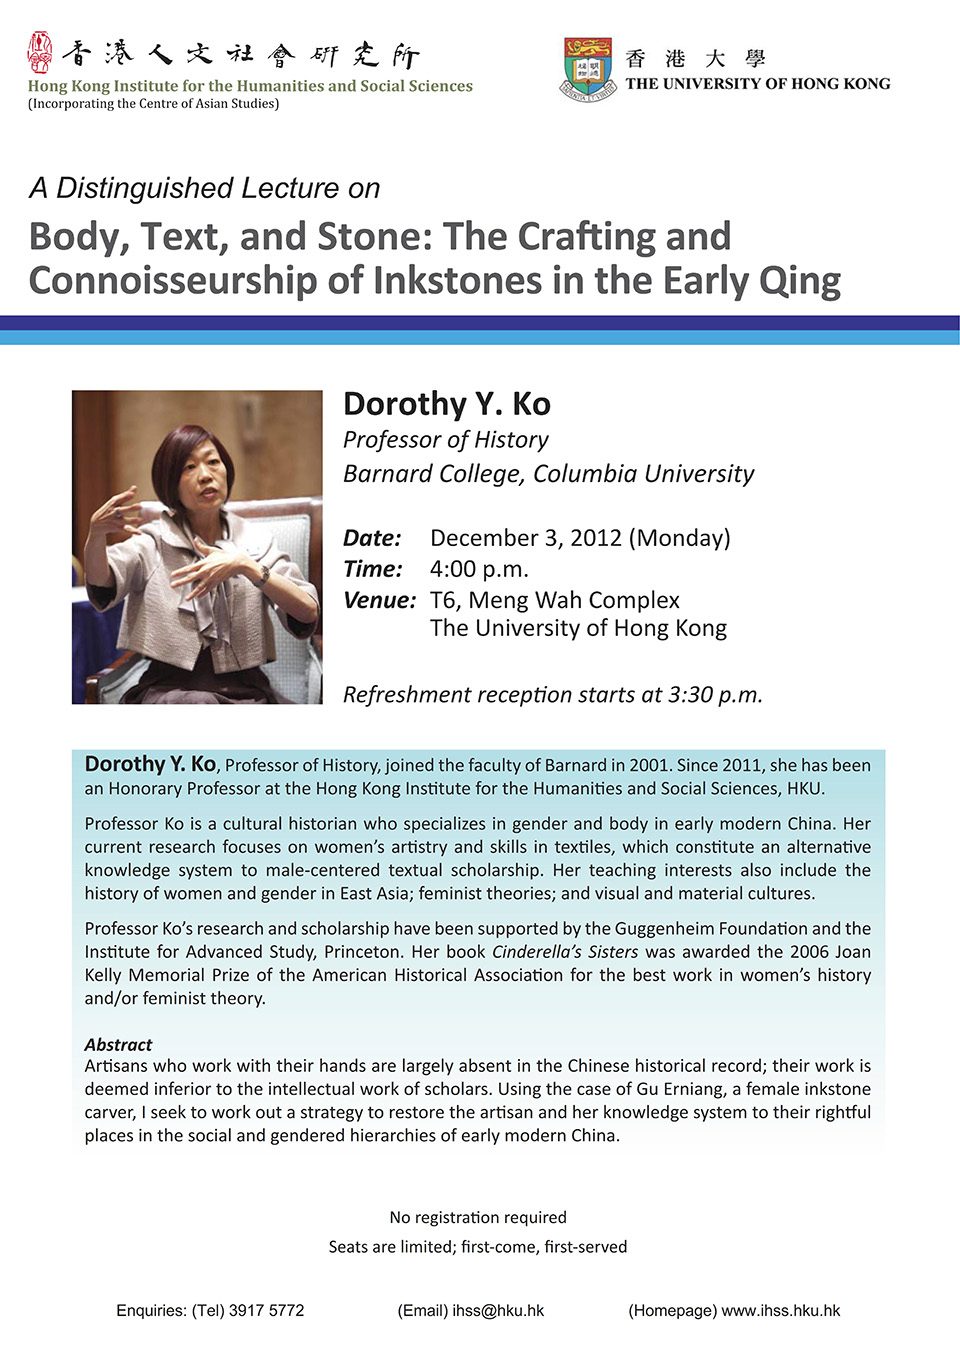 Distinguished Lecture on “Body, Text, and Stone: The Crafting and Connoisseurship of Inkstones in the Early Qing” by Professor Dorothy Ko (December 3, 2012)